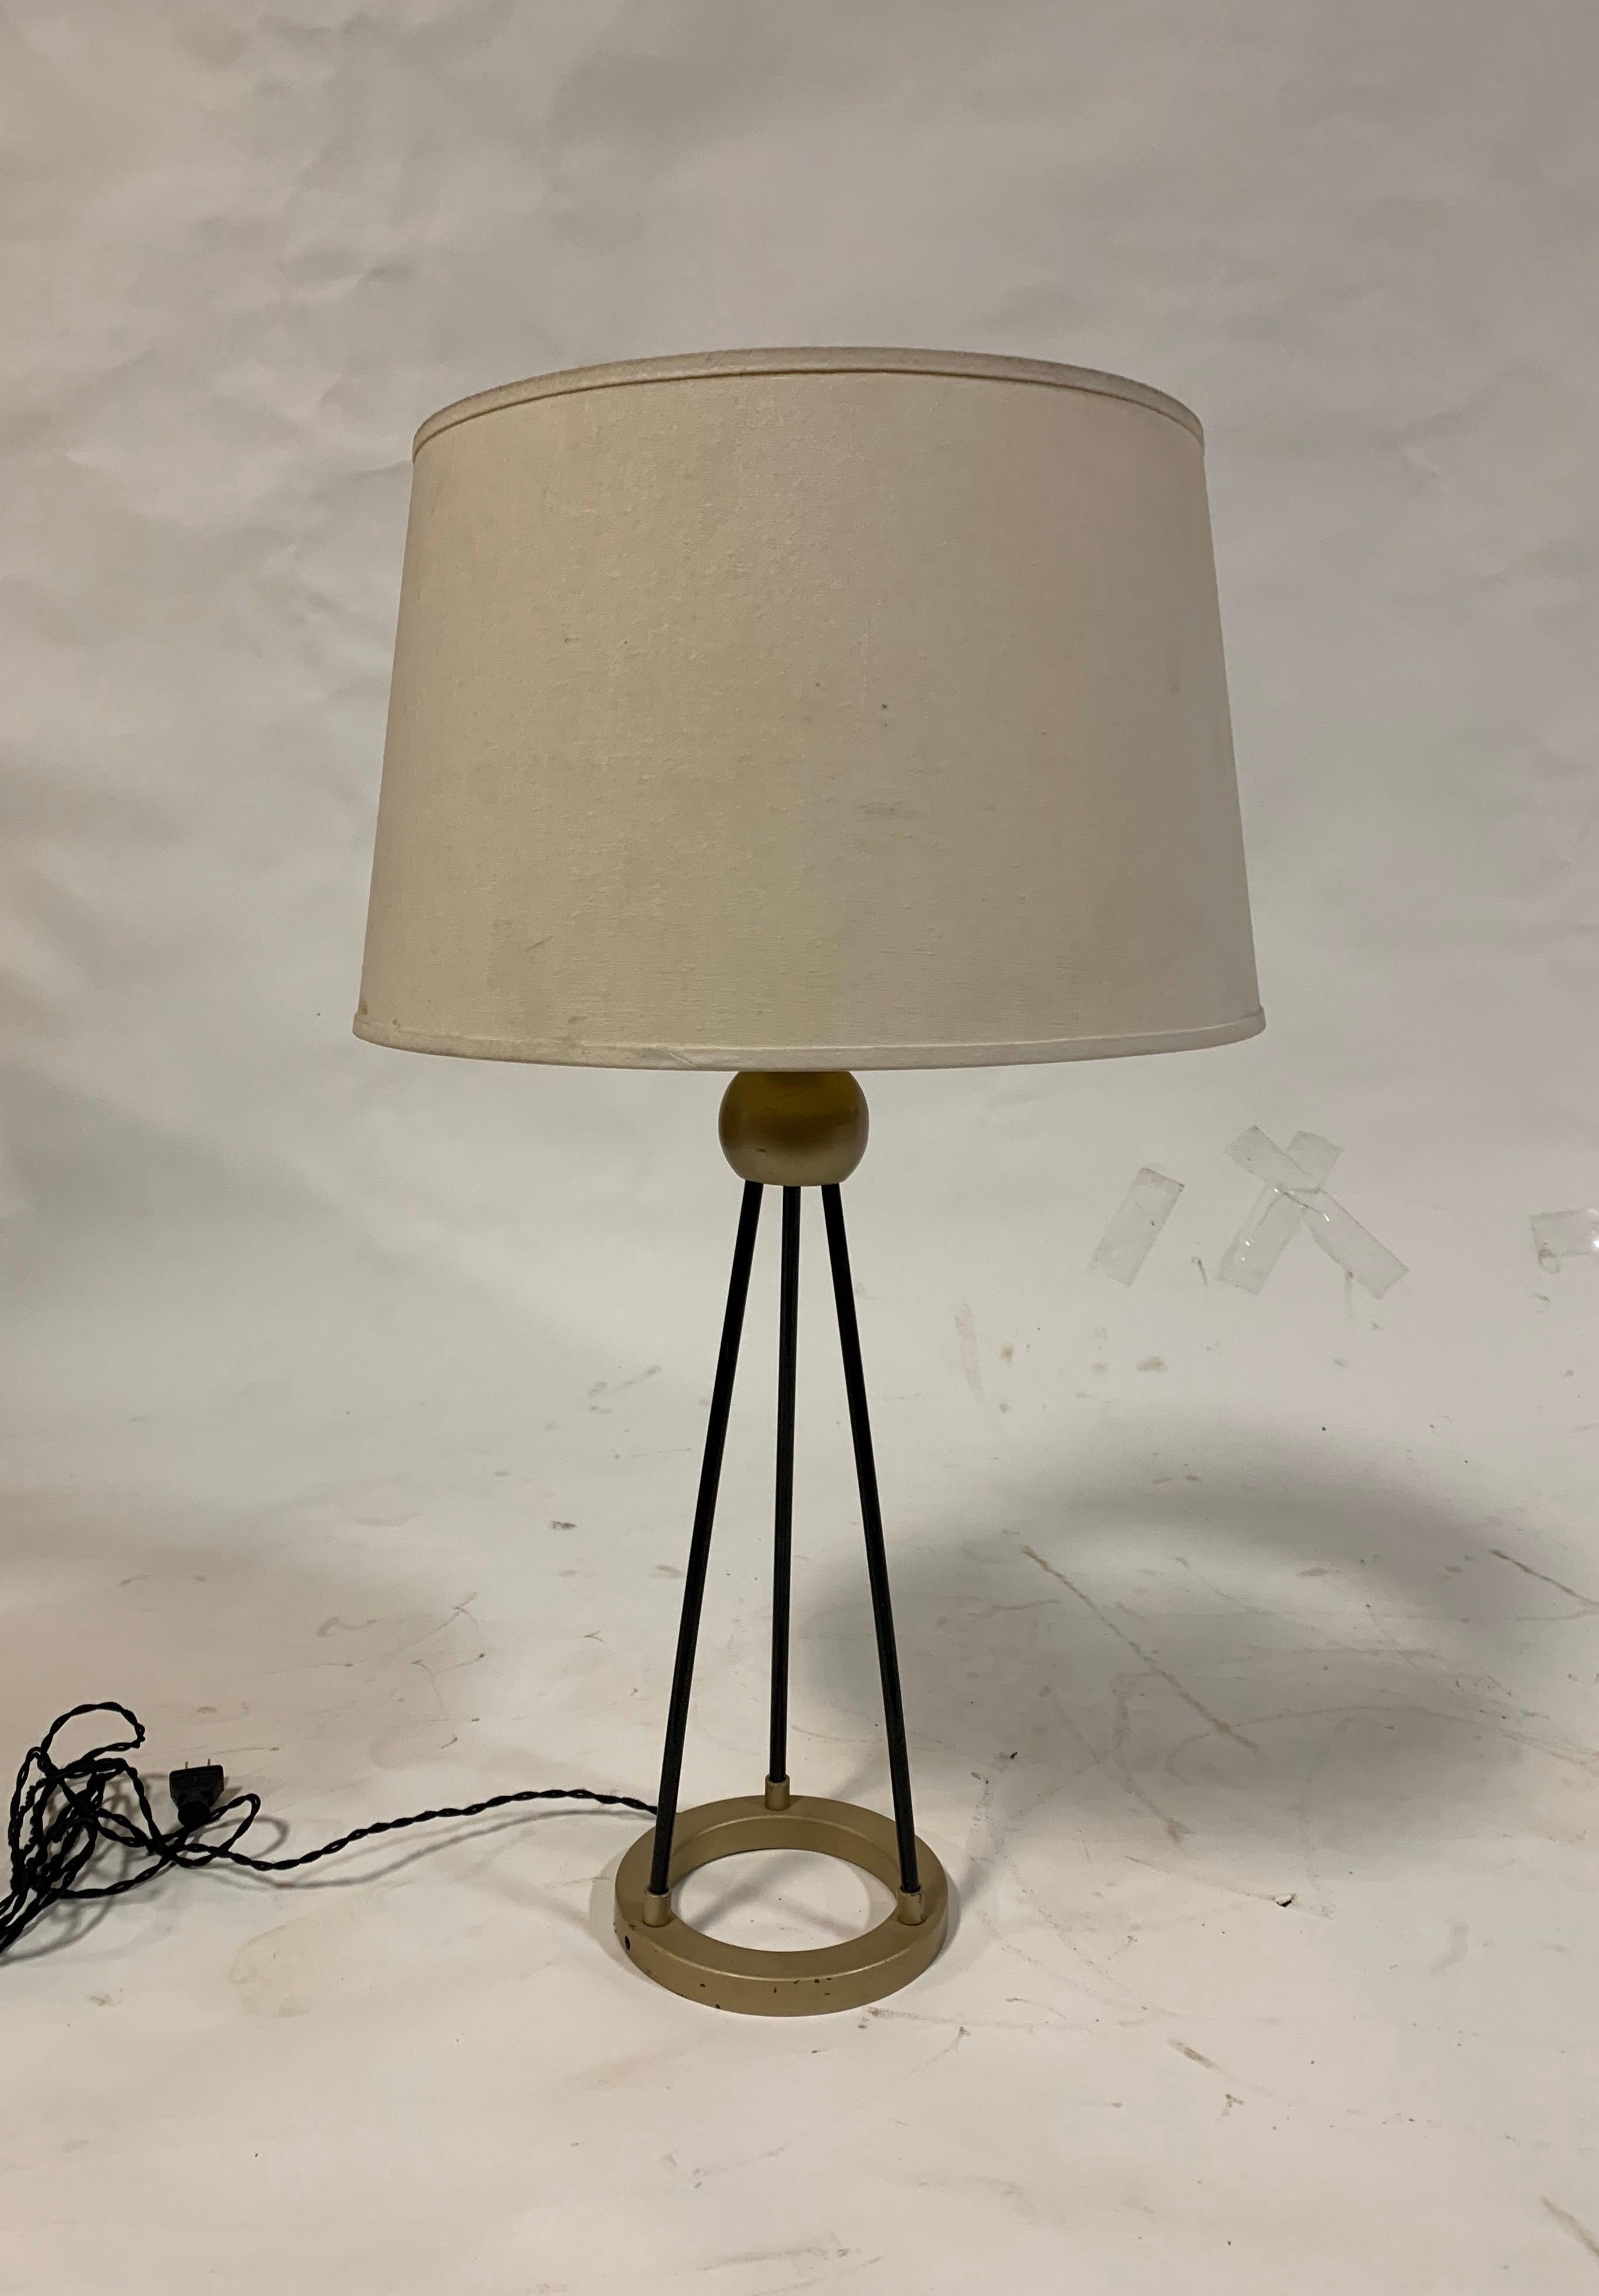 A brass and black metal table lamp; possibly by Walter Von Nessen. USA, circa 1940. Rewired with new sockets and French black silk twisted cord.

Takes one standard US bulb, 75 watts max.

Includes off white linen drum